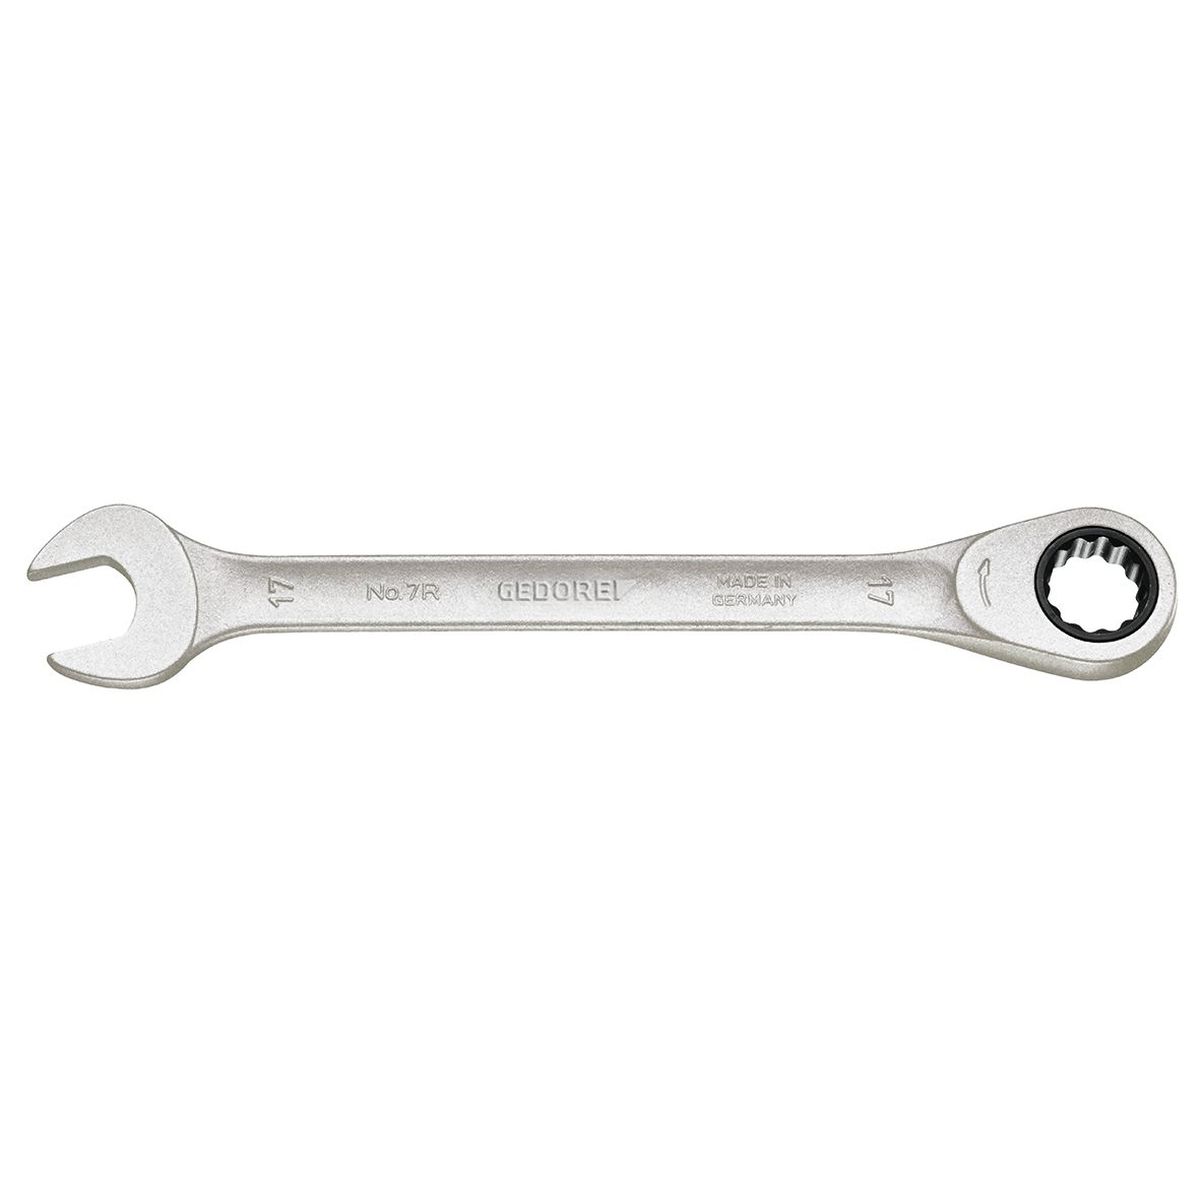 Combination ratchet spanner 8 mm 7 R 8 Gedore